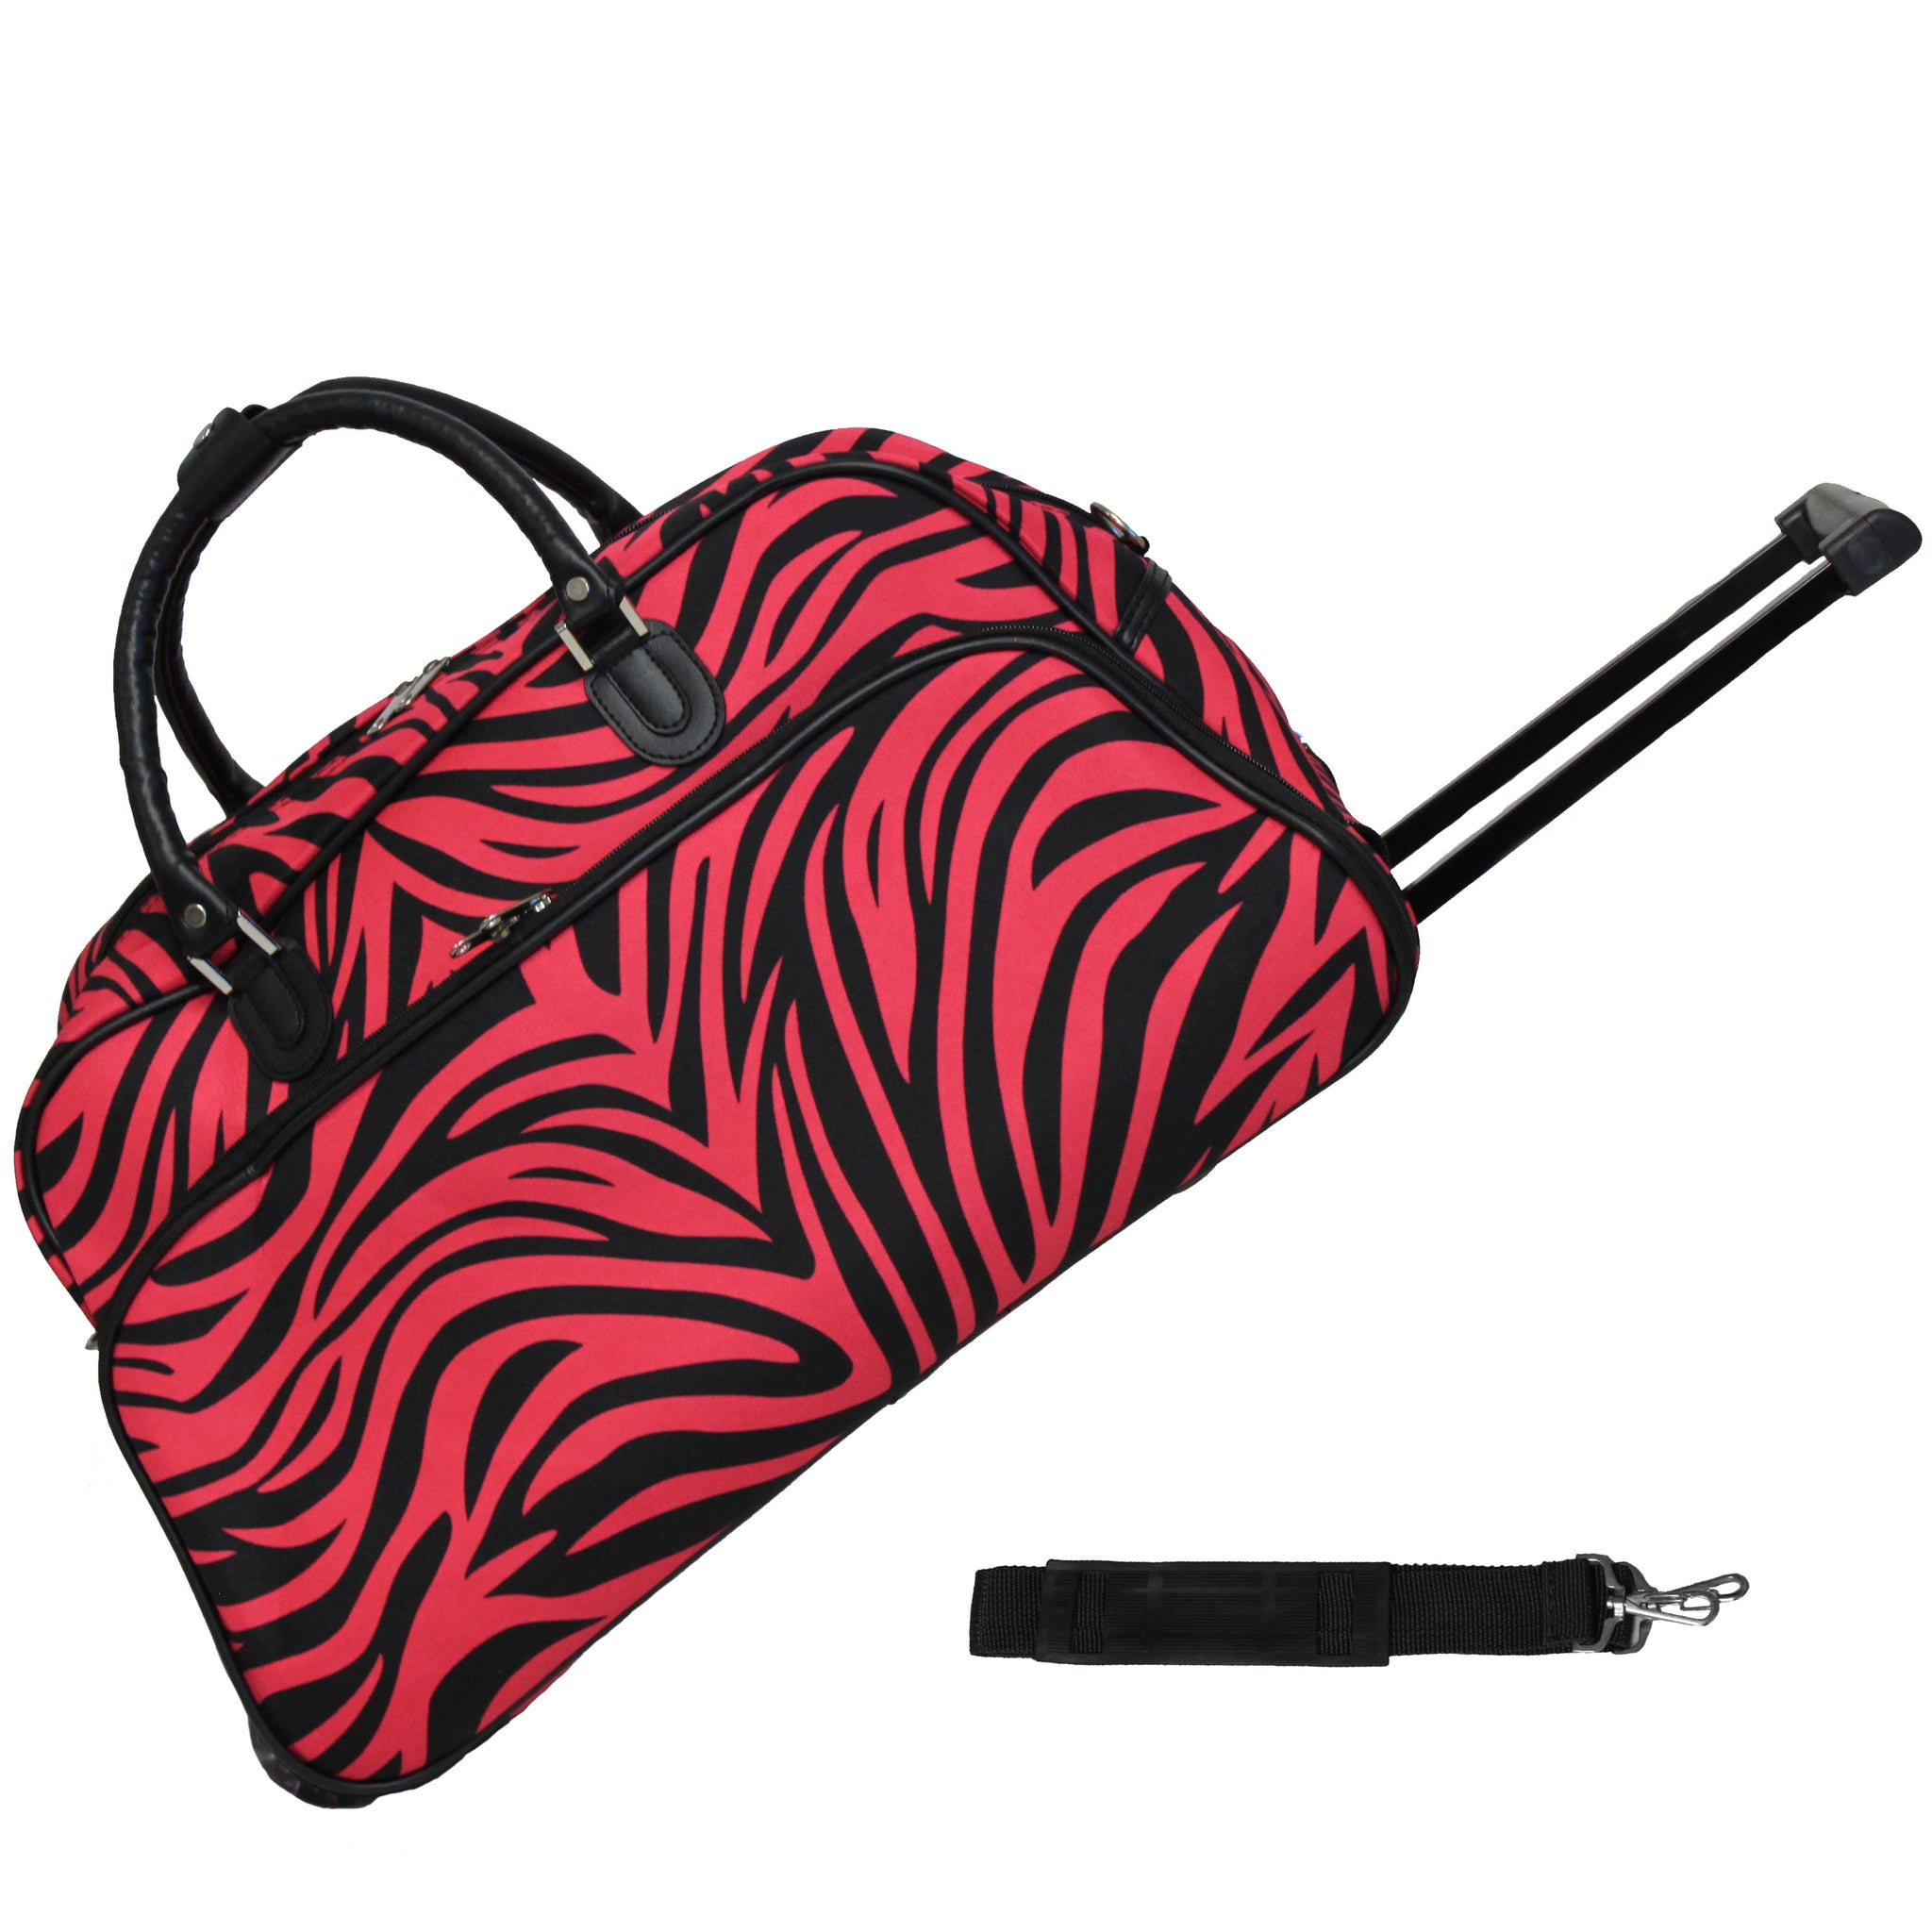 CalBags Zebra 21" Rolling Carry-On Duffel Bags